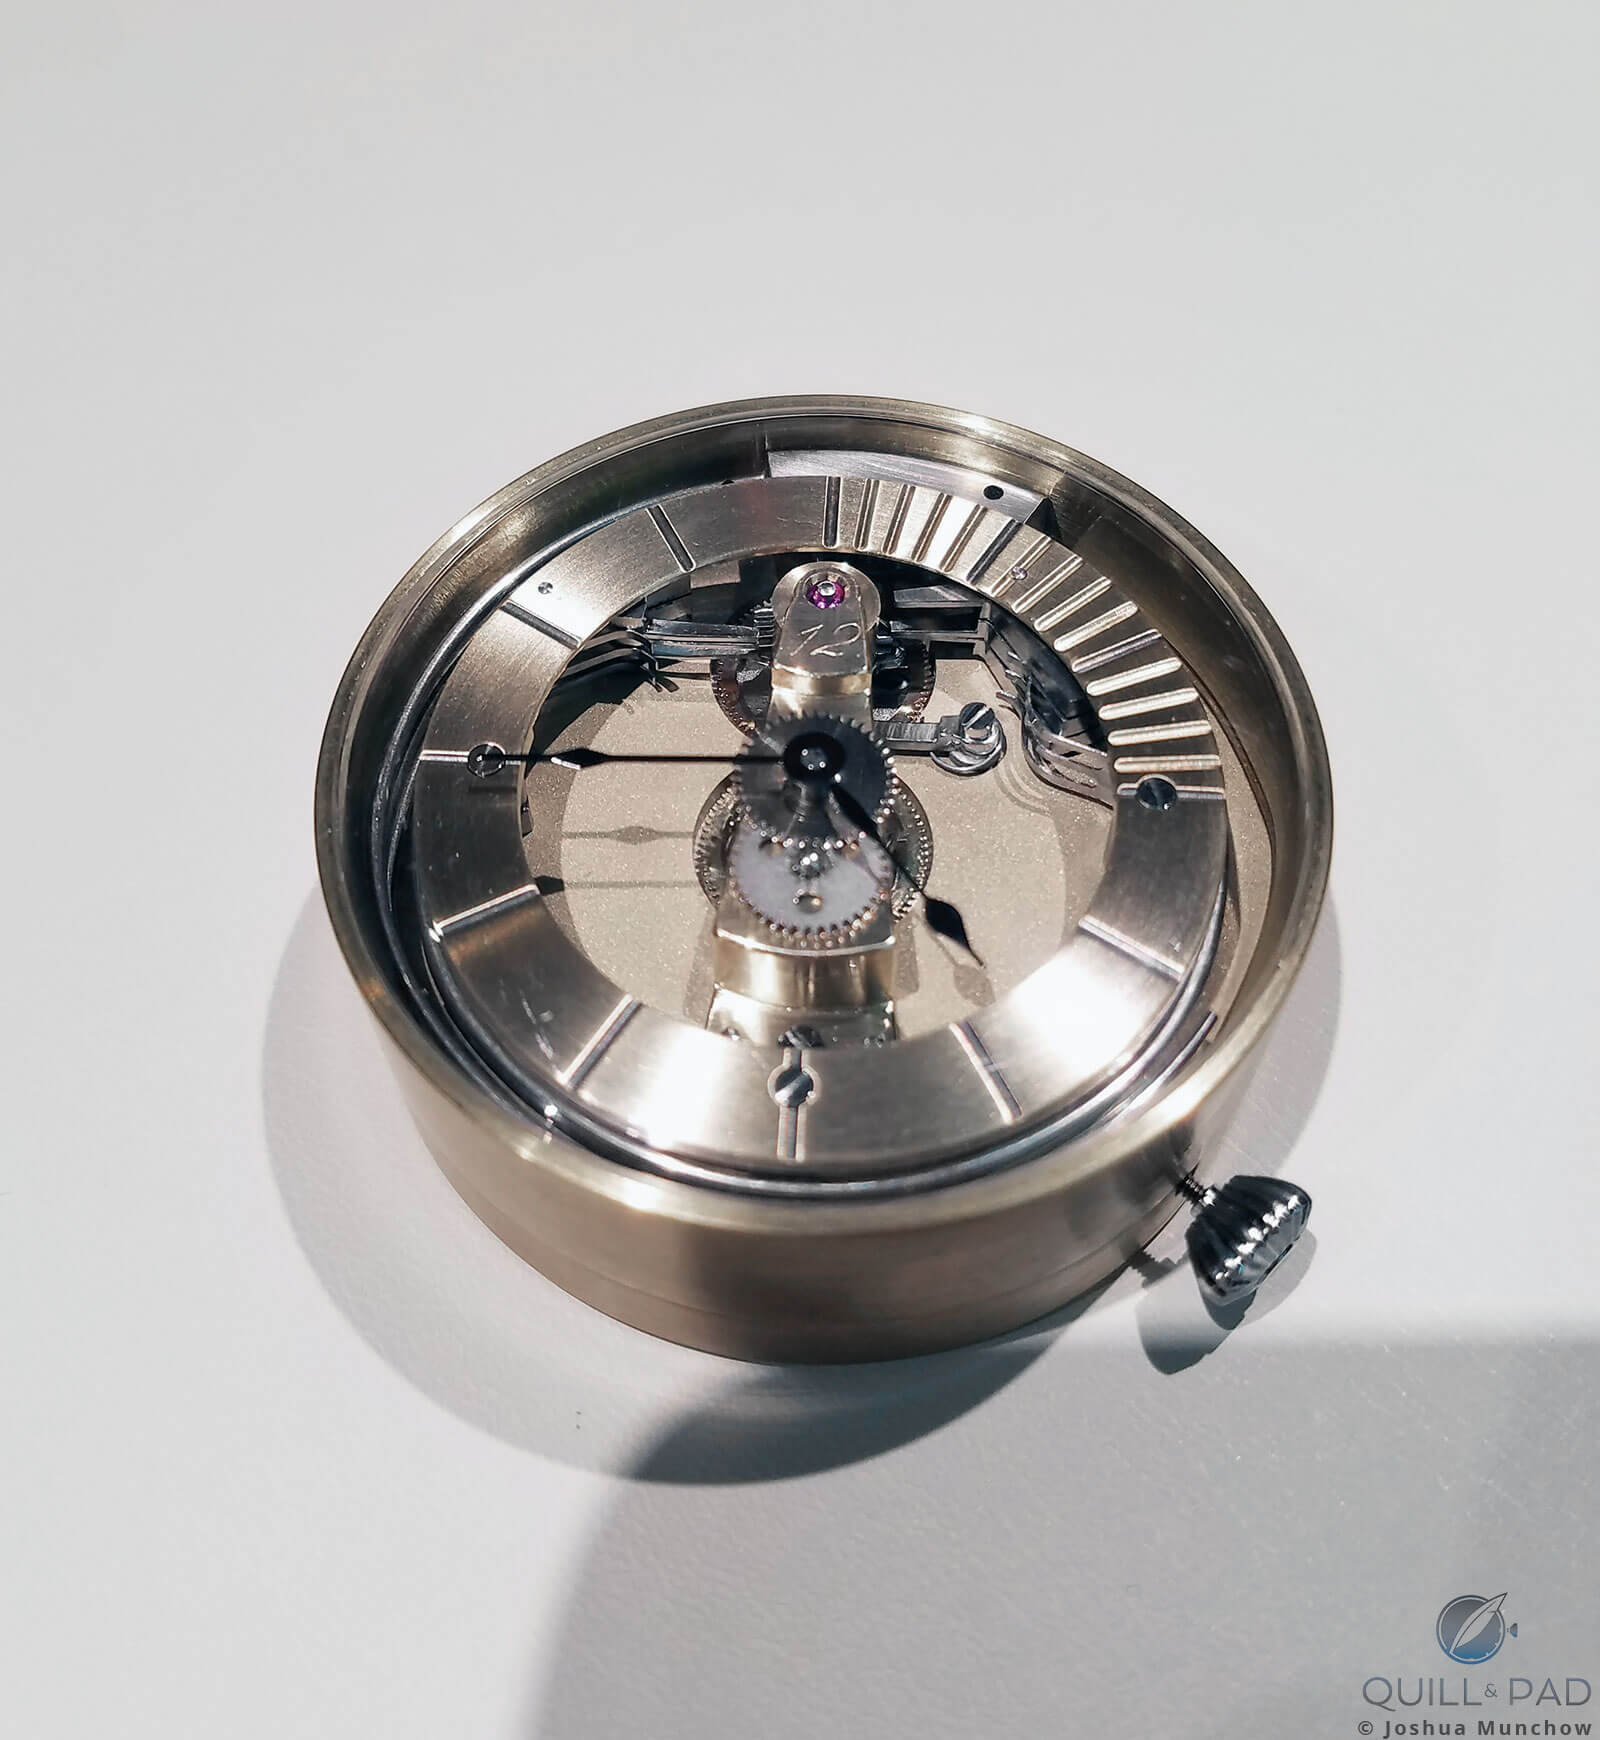 Prototype Ostinato chiming watch by Otto Peltola Ostinato, eventual winner of the 2018 Walter Lange Watchmaking Excellence Award